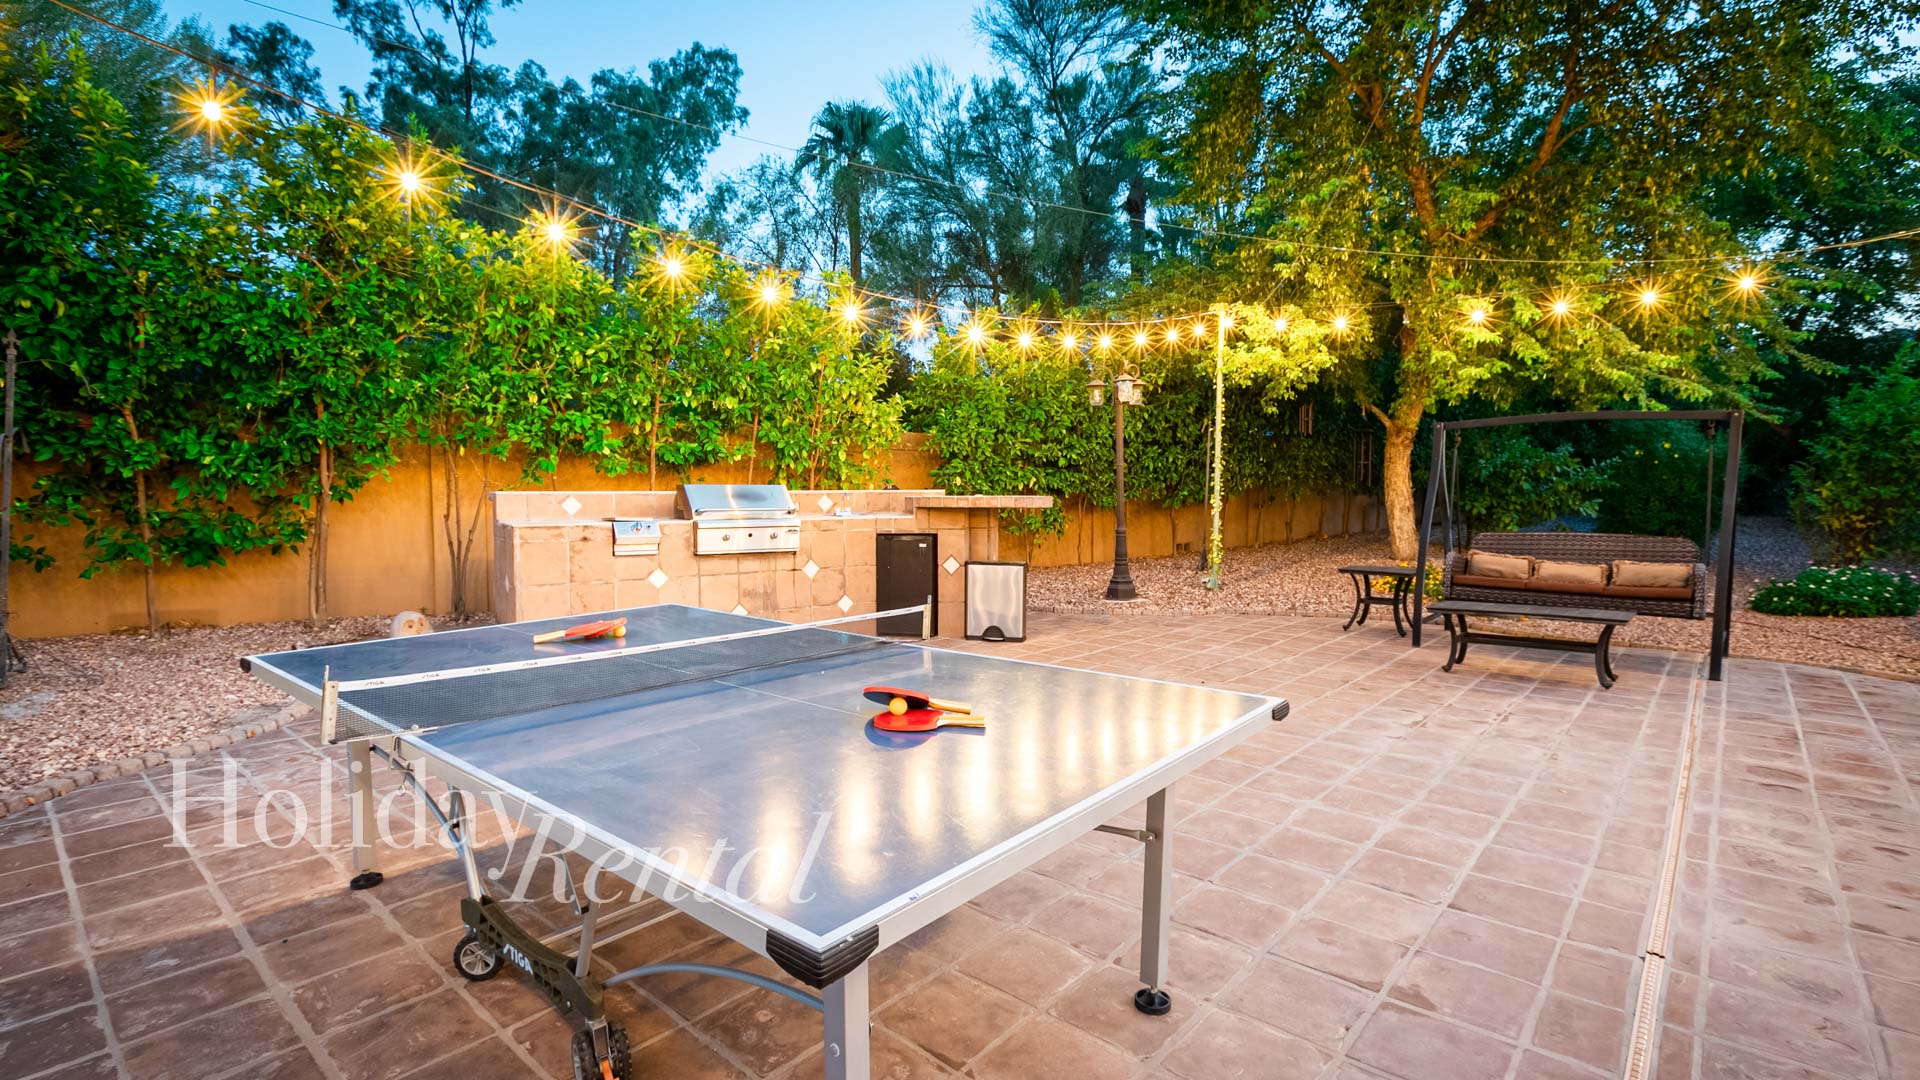 The patio grill and outdoor ping pong table are just some of the many outdoor amenities